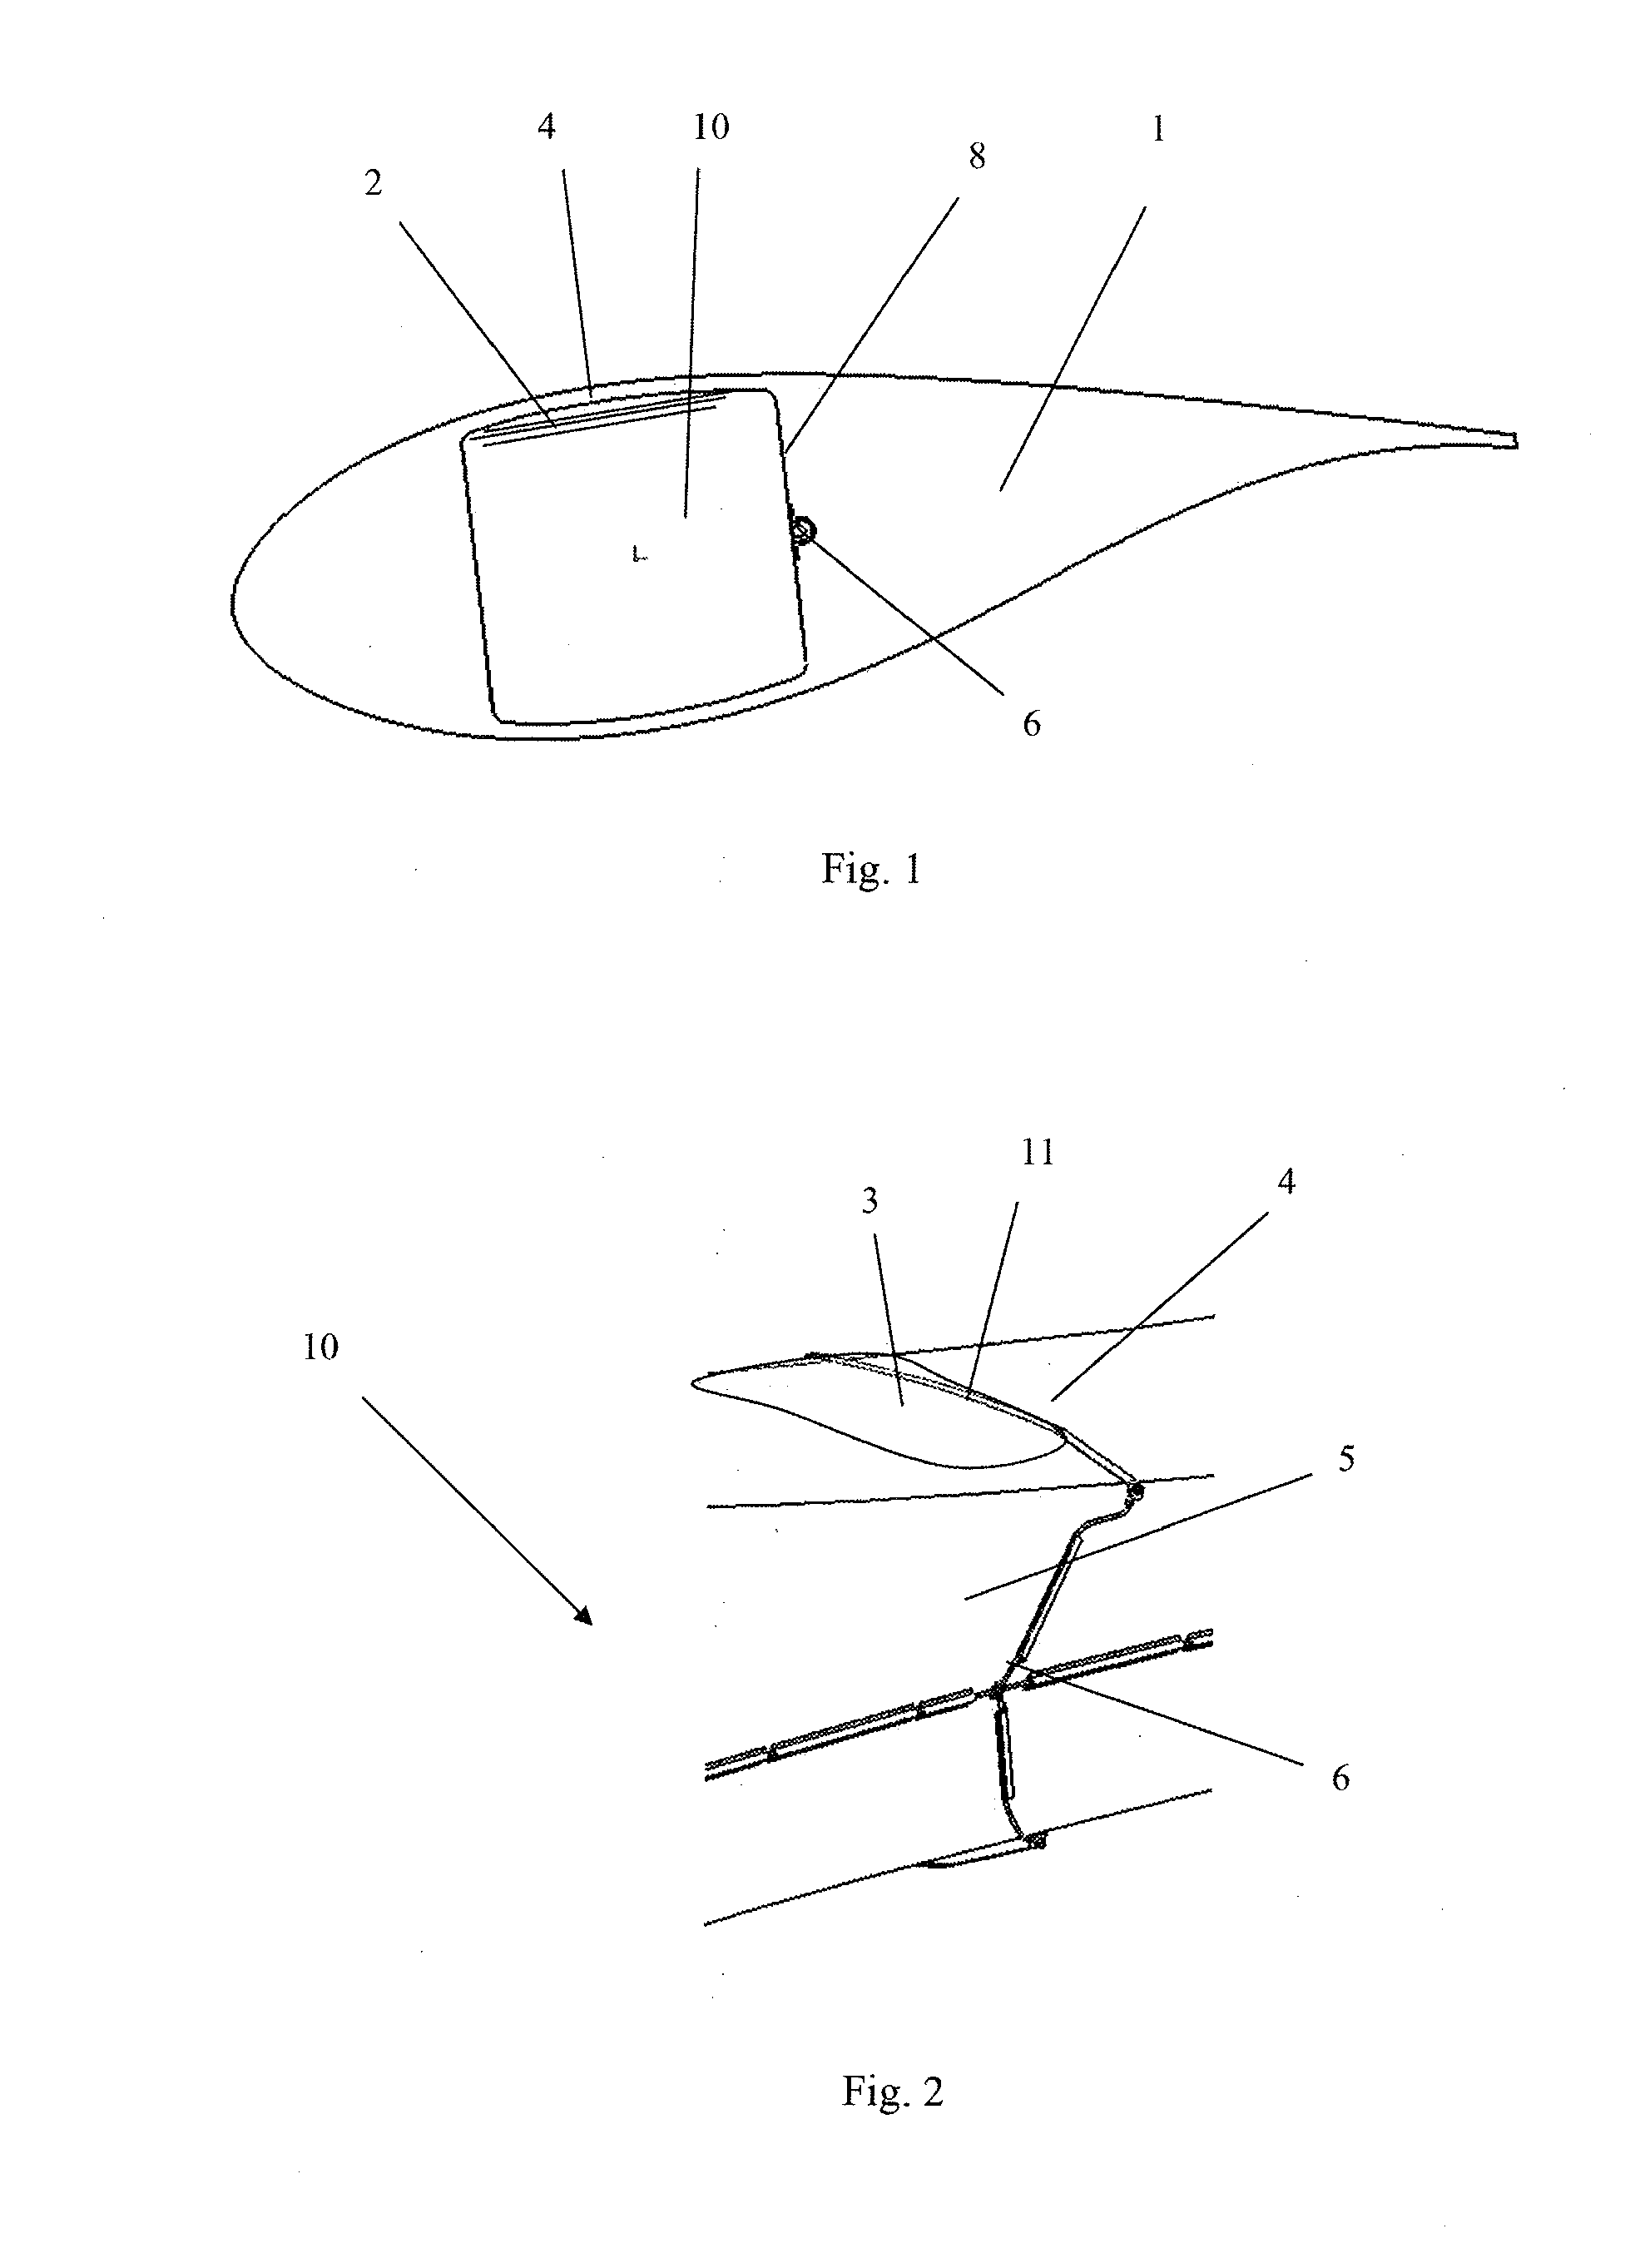 Lightning conduction system for wind turbine blades with carbon fiber laminates